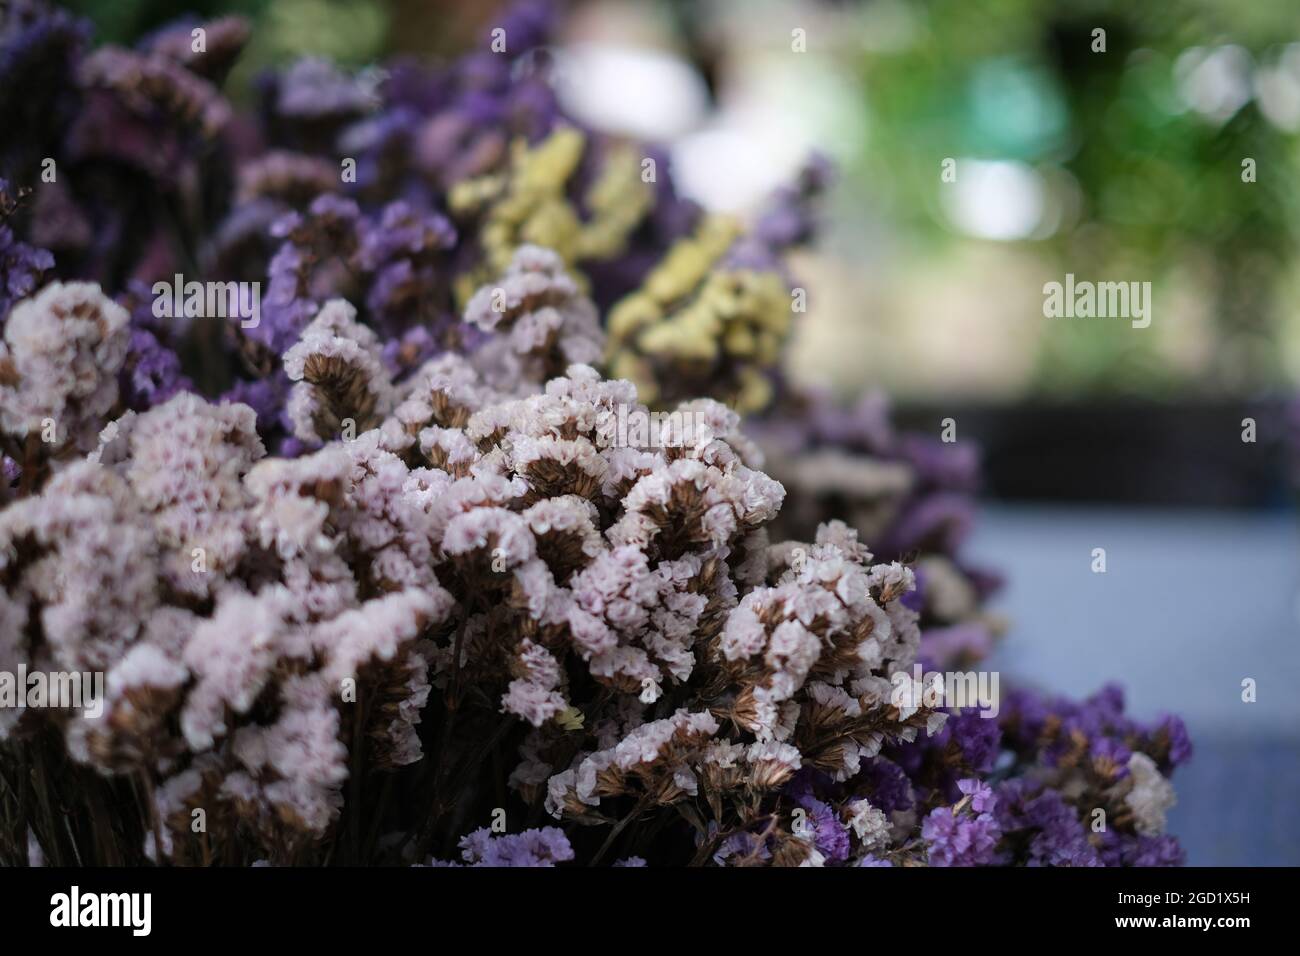 A close-up view of a bouquet of dried flowers, seen in a street cafeteria in a remote village of Thailand Stock Photo